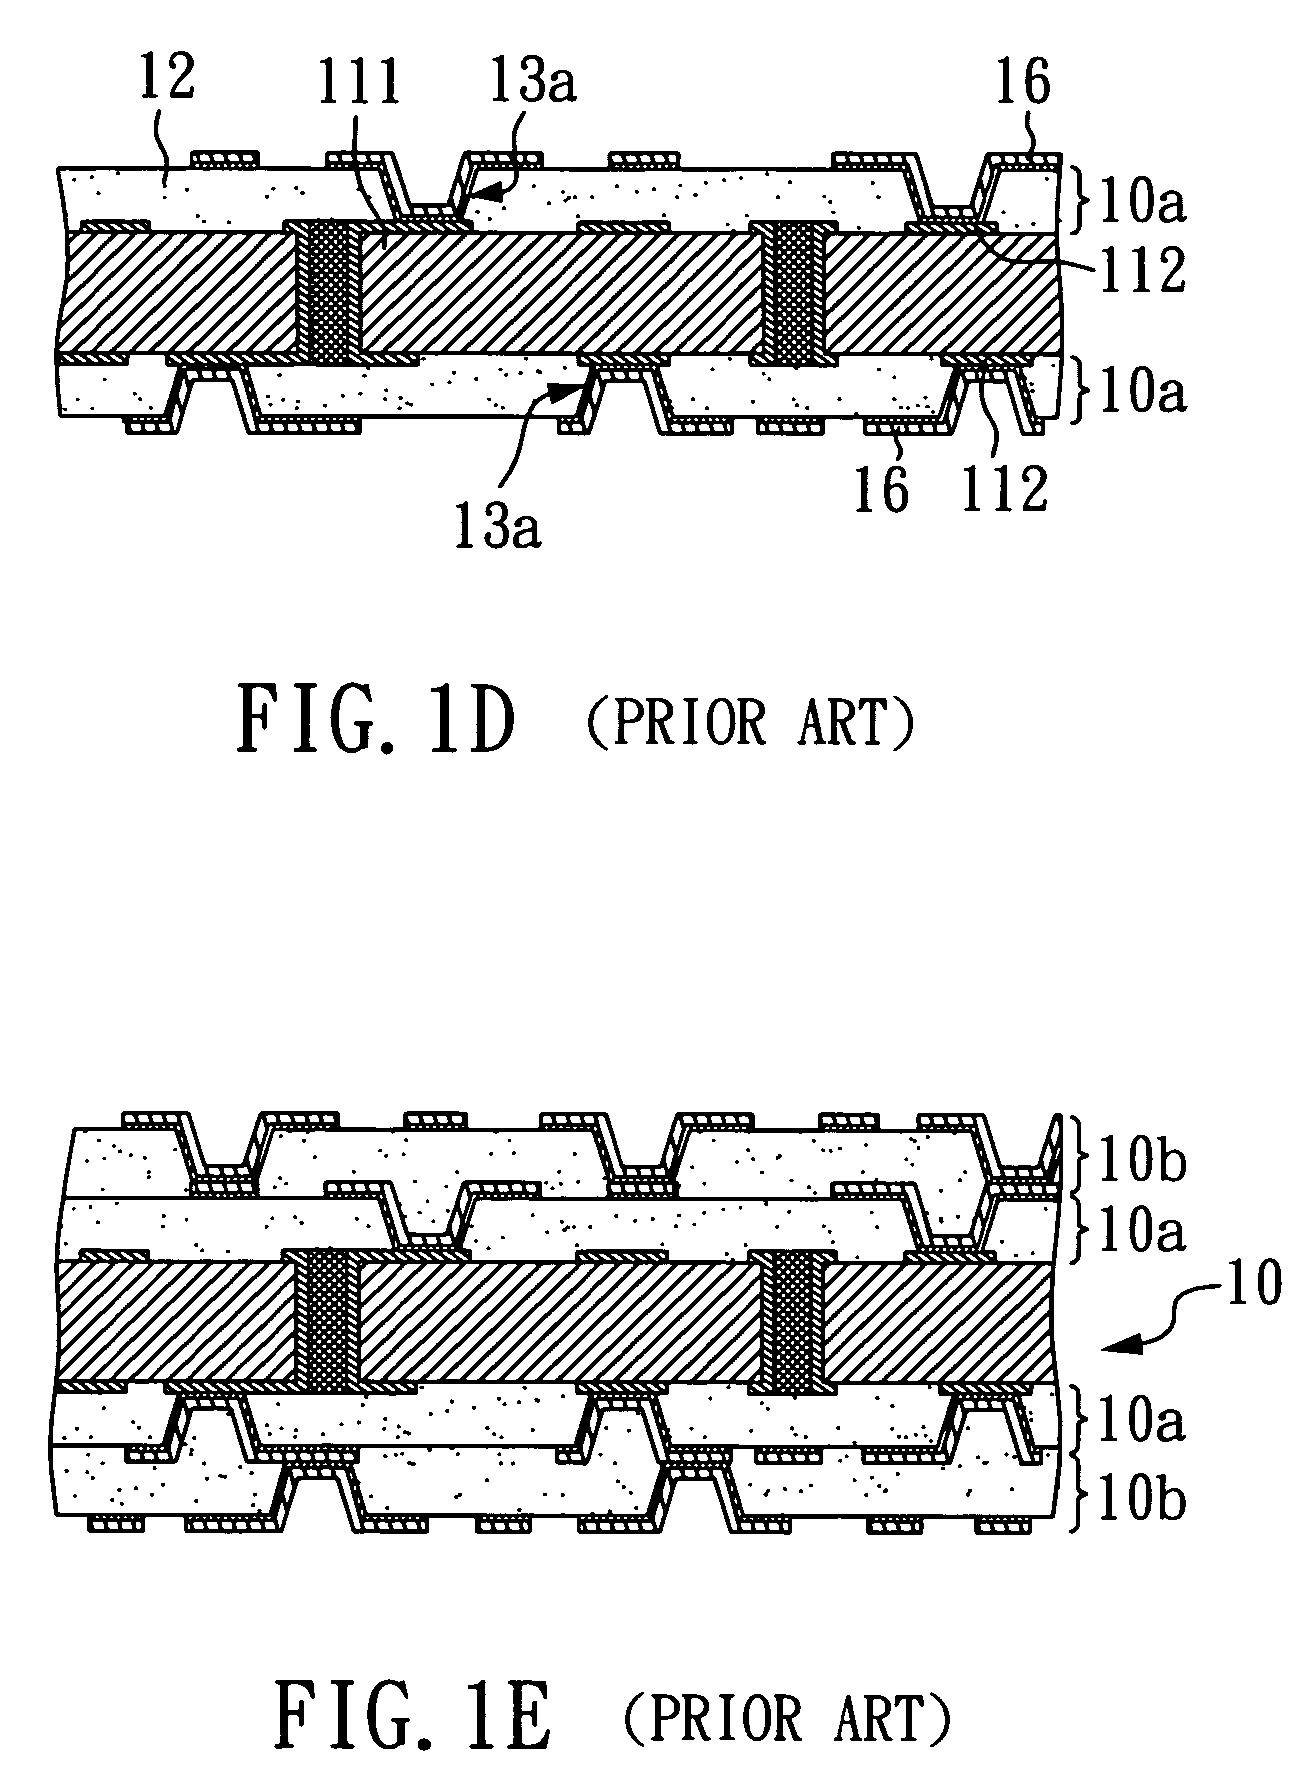 Coreless package substrate with conductive structures